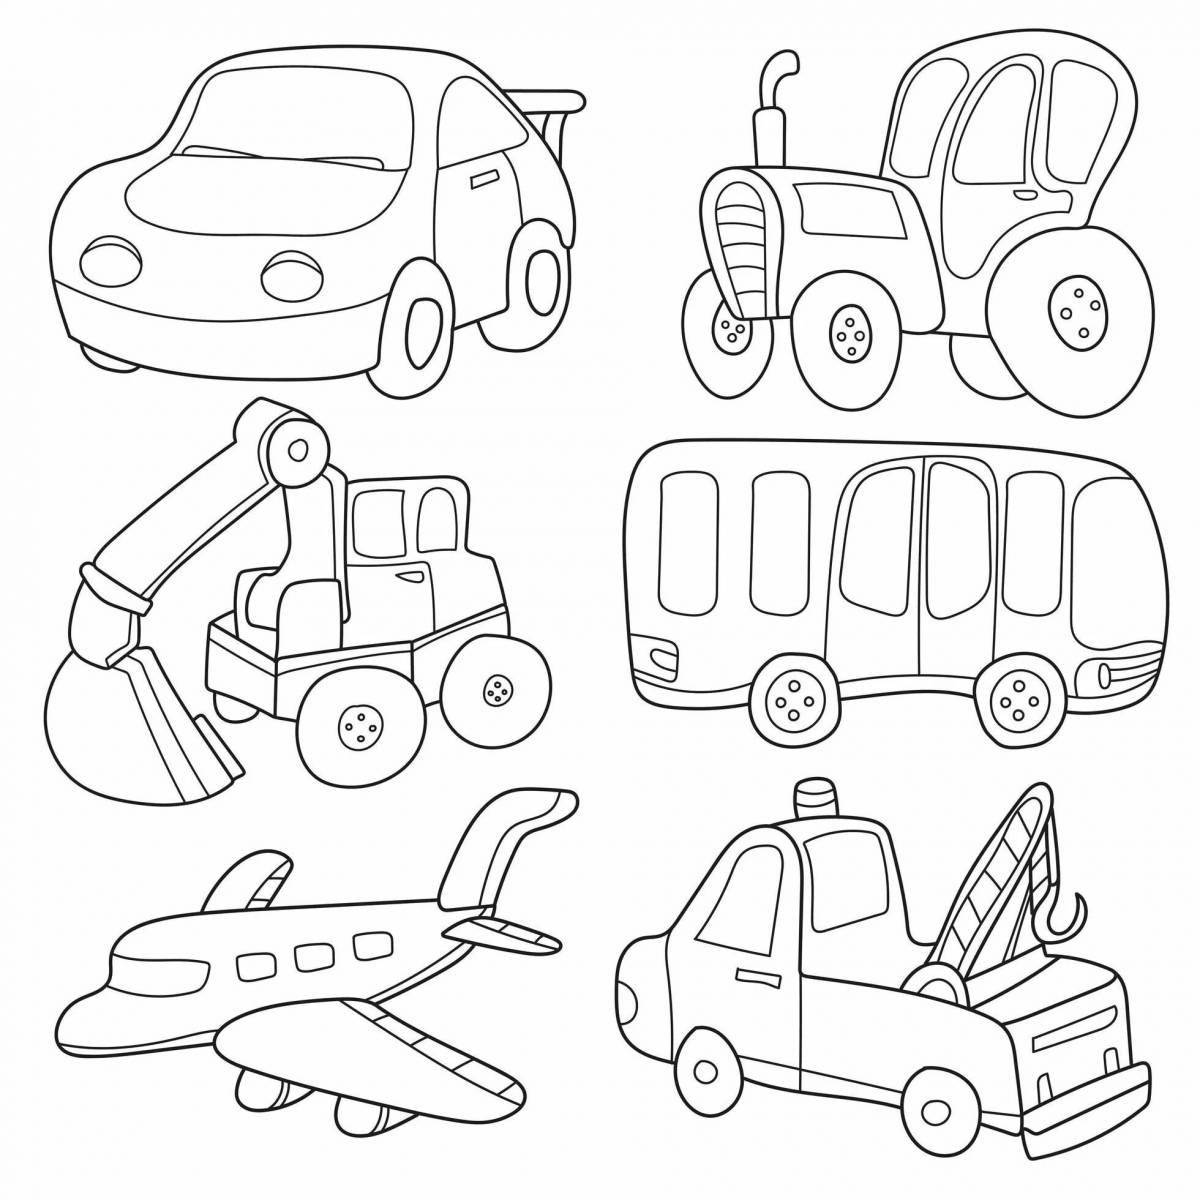 Exquisite special vehicle coloring book for 6-7 year olds